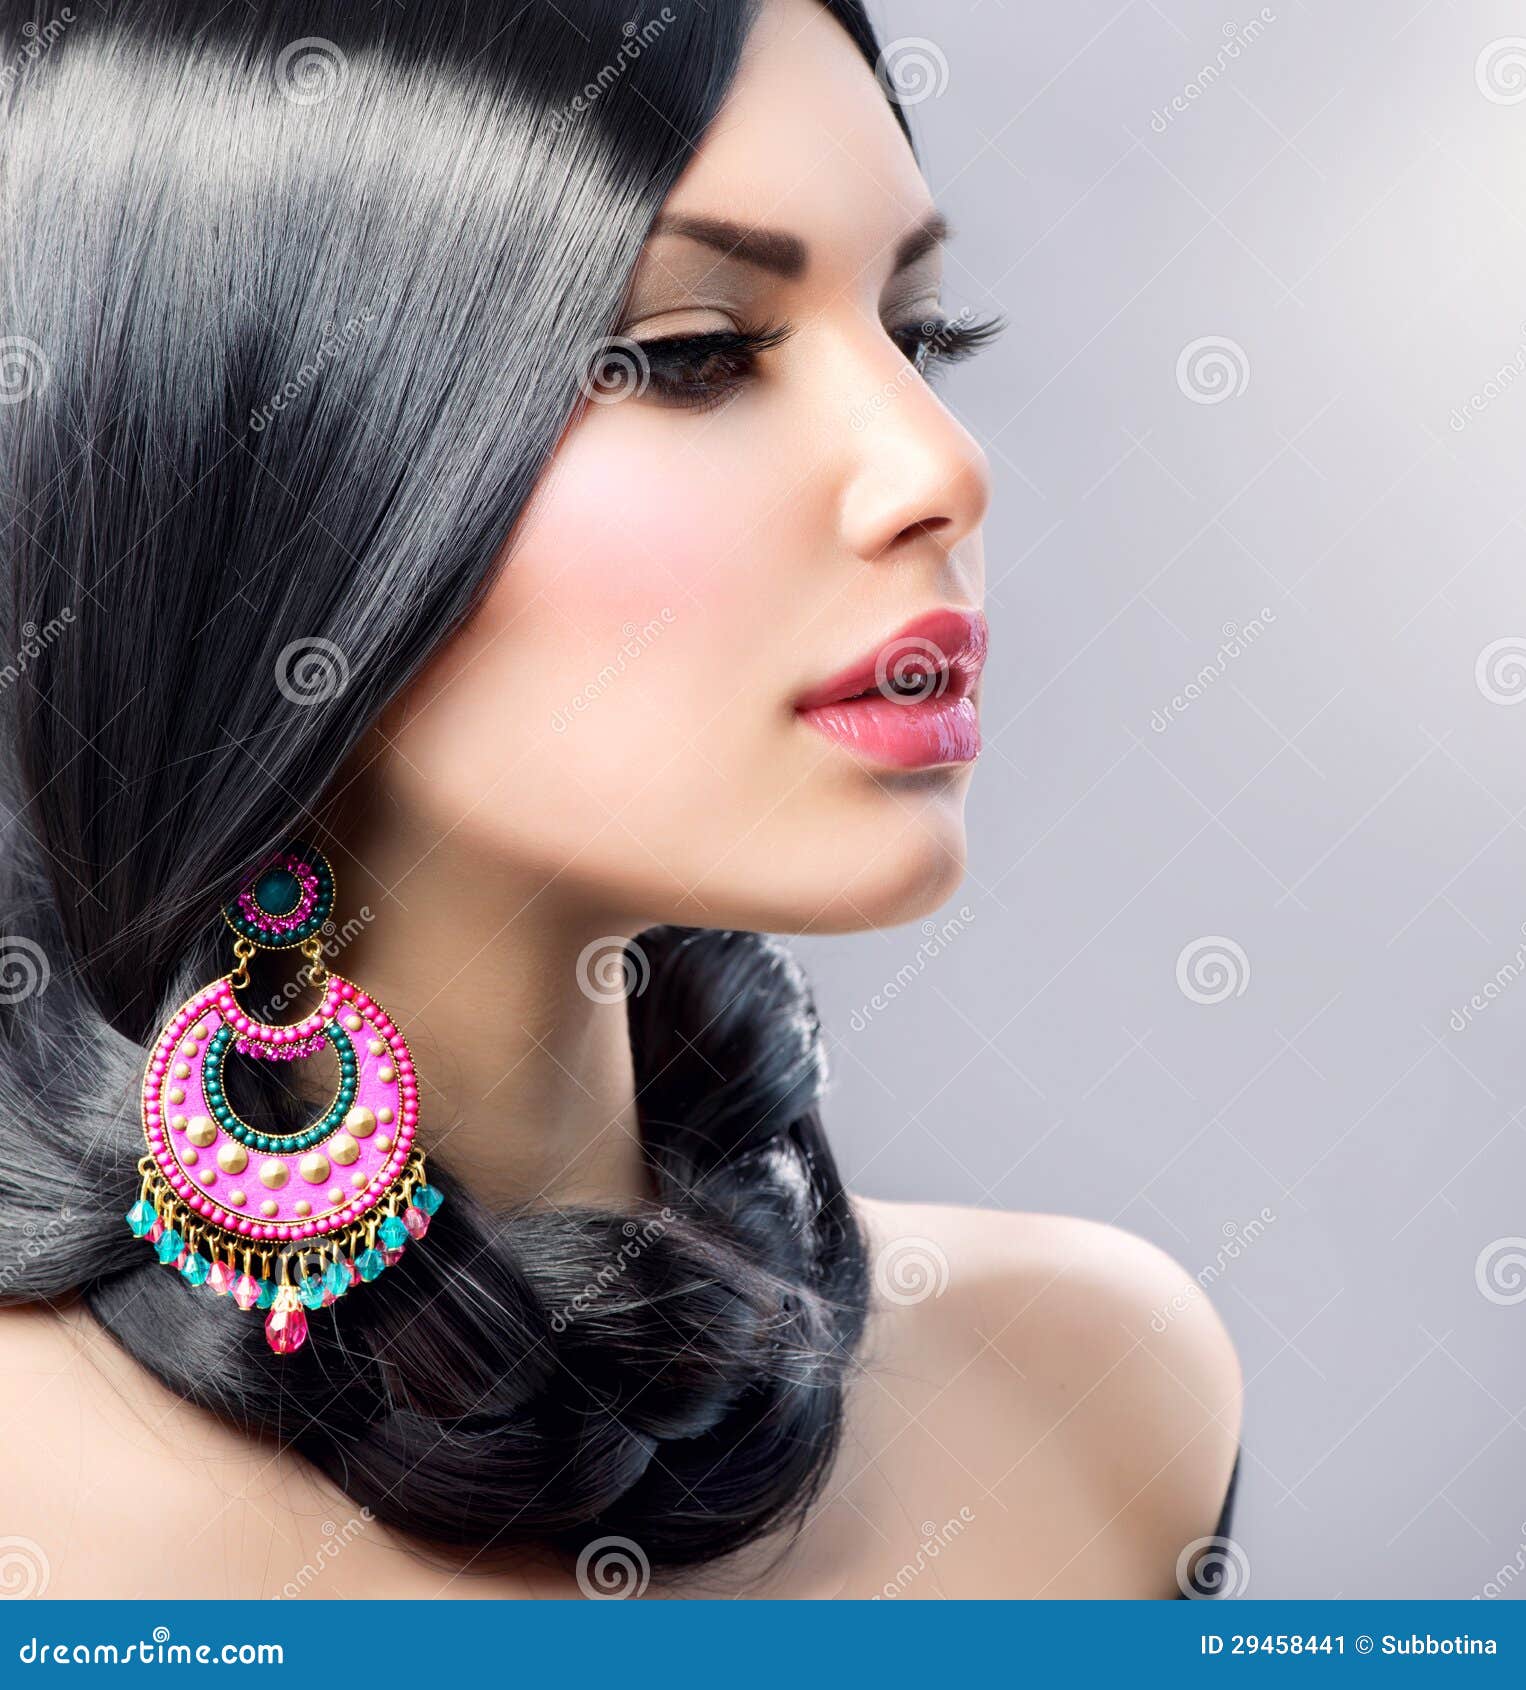 Beauty with Long Black Hair Stock Image - Image of face, braid: 29458441